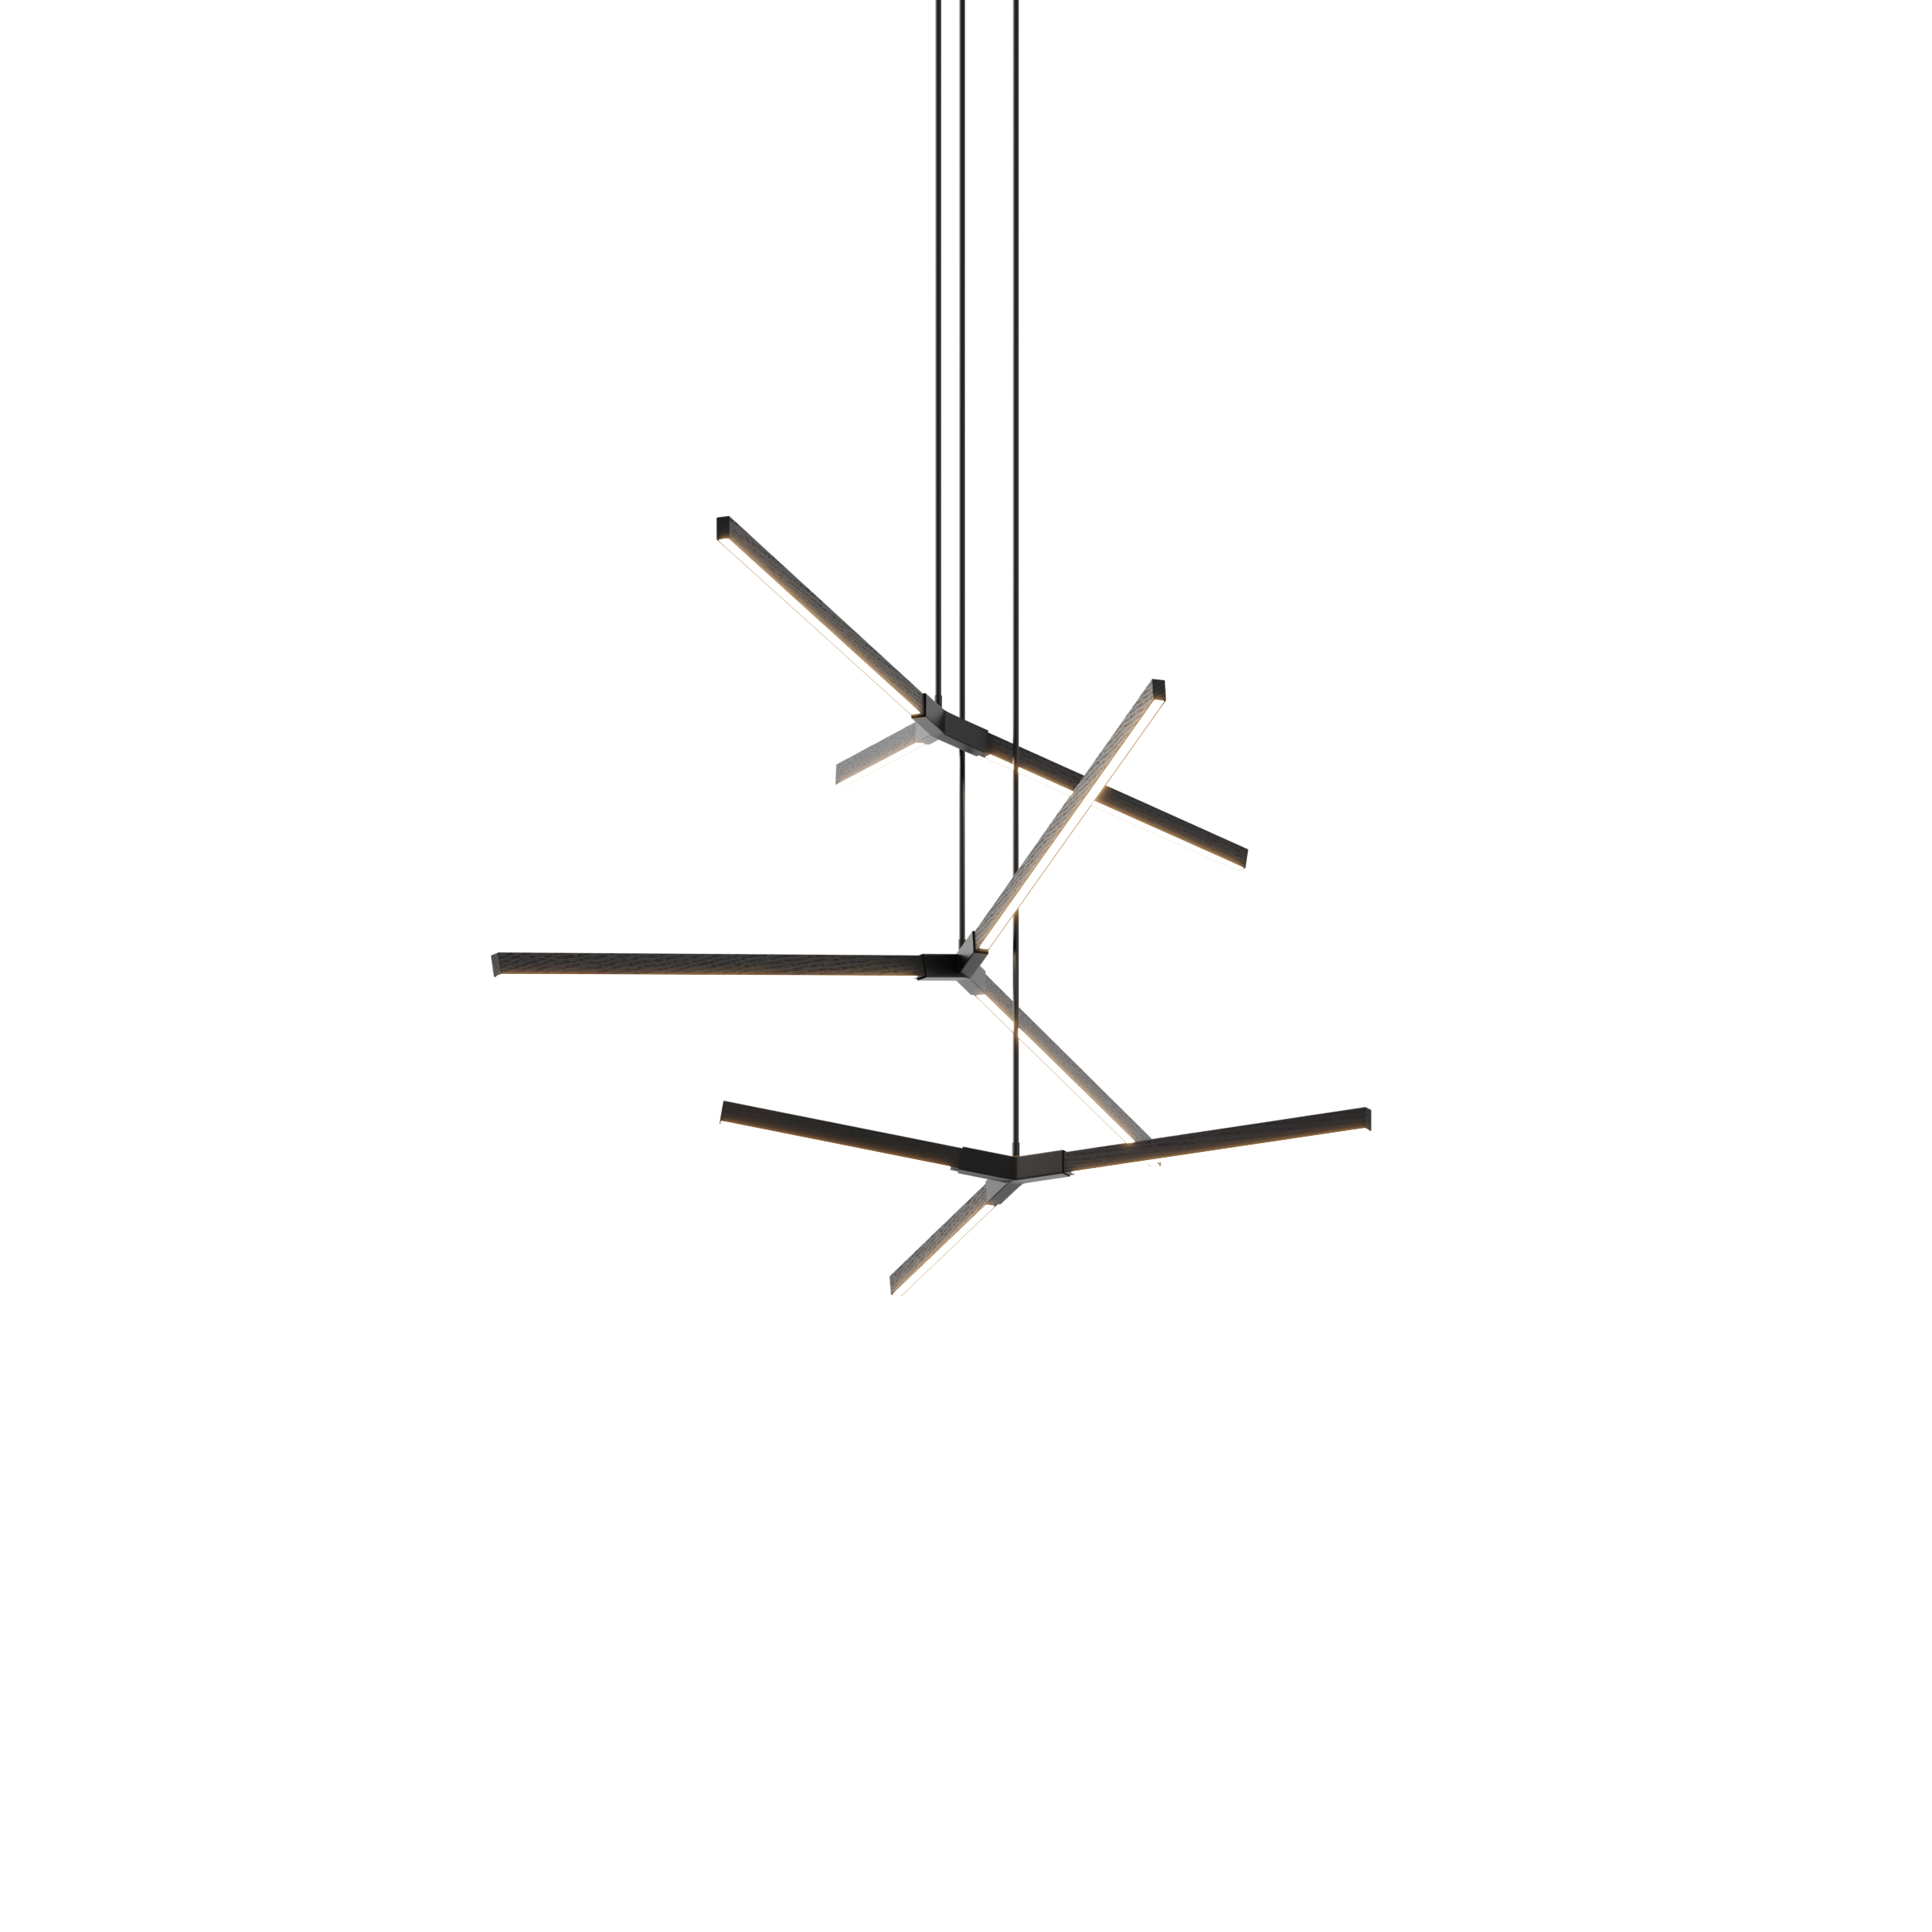 Image of a Stickbulb Multiple Bough lighting fixture. The modern fixture consists of sleek wooden beams with multiple integrated LED bulbs.